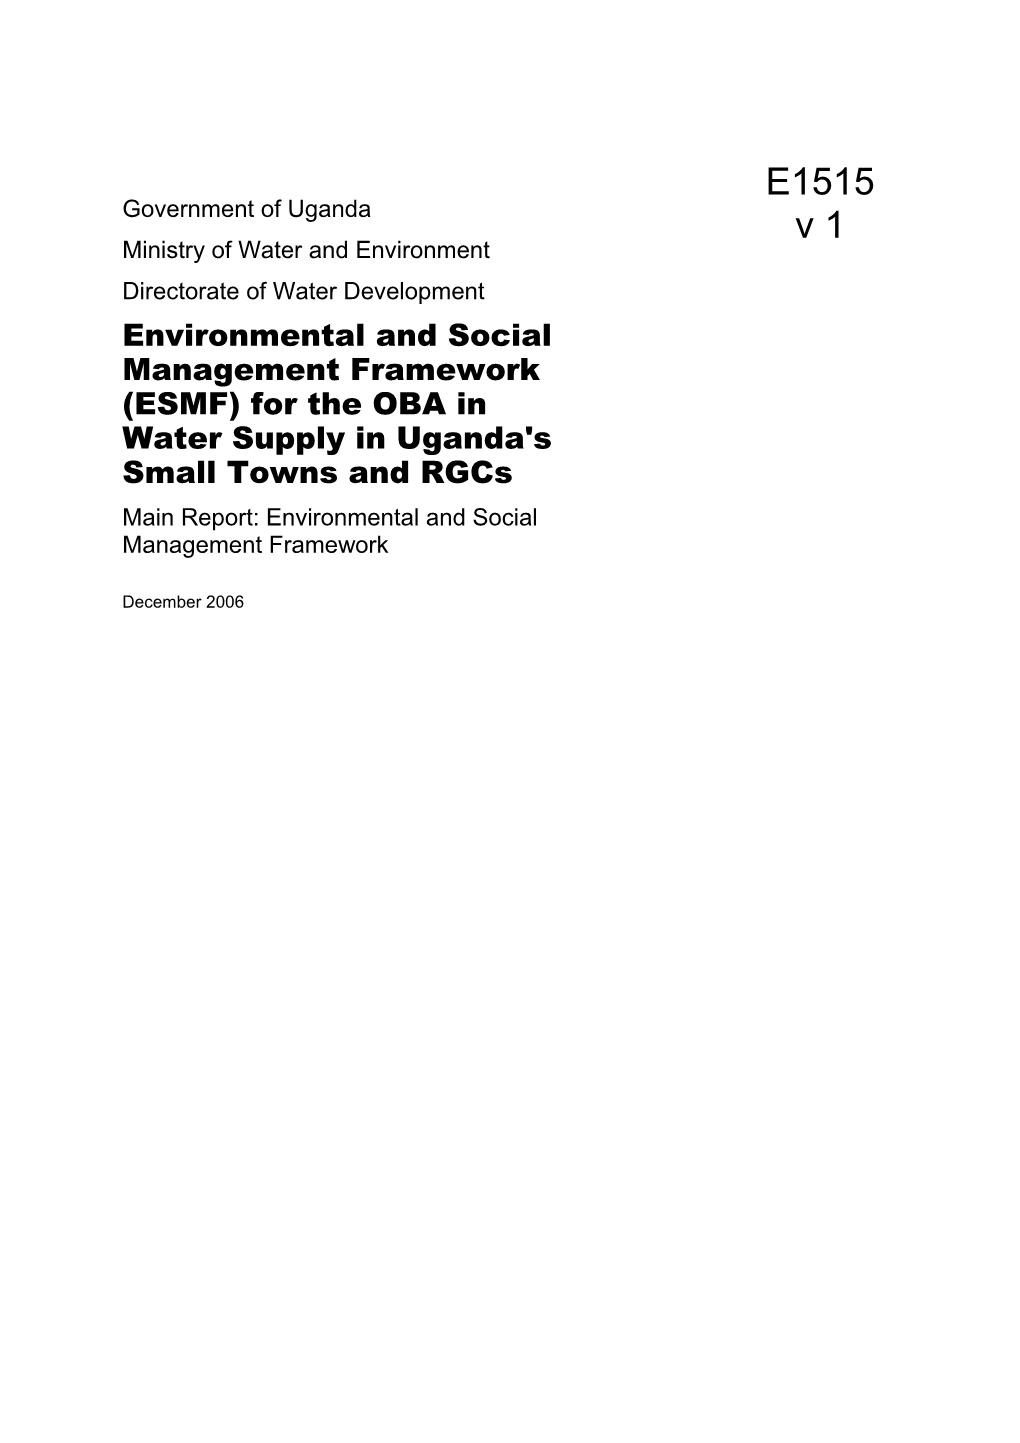 Environmental and Social Management Framework (ESMF) for the OBA in Water Supply in Uganda's